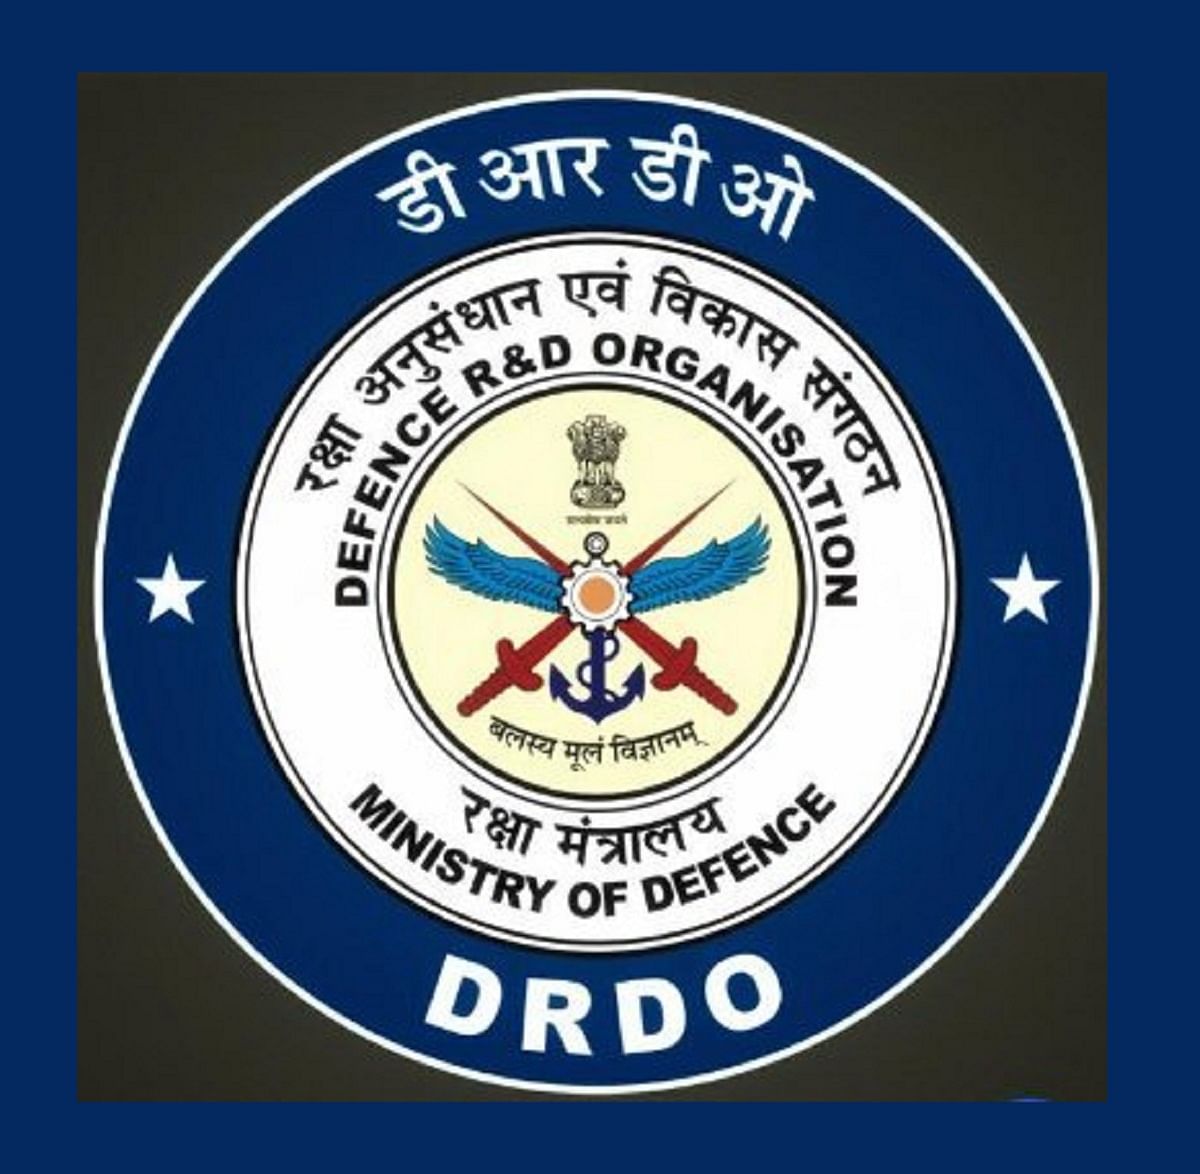 DRDO Notifies 150 Apprentices Vacancy for ITI, Diploma, B.E/ BTech Students, Check Eligibility and Selection Criteria Here